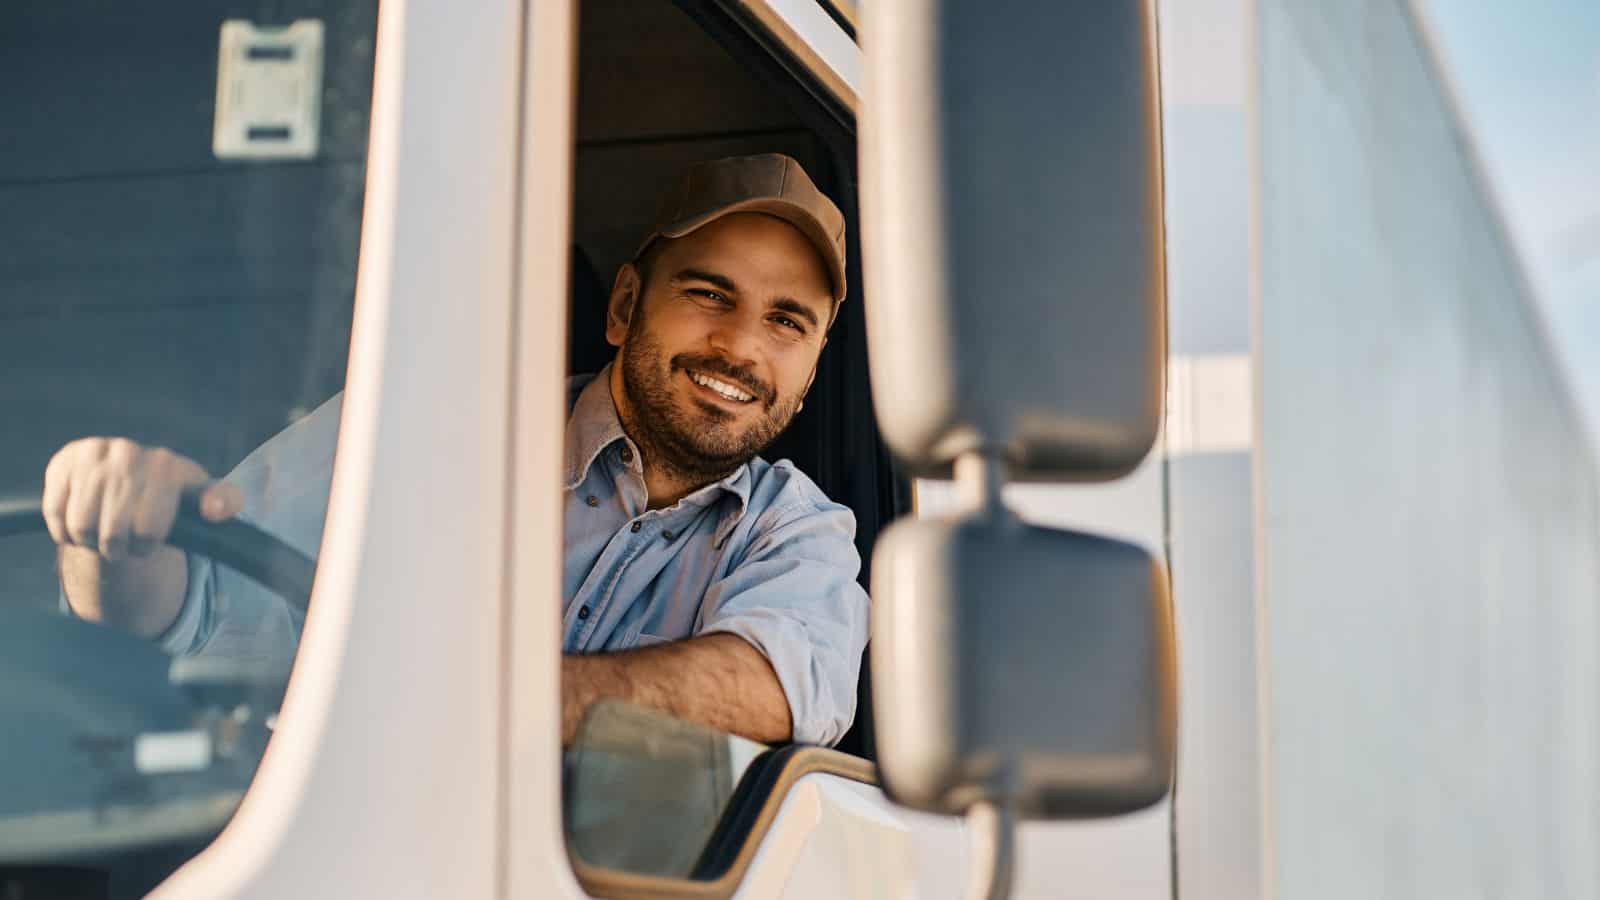 <p>Like transportation workers, drivers and truck drivers are more prone to deaths through traffic crashes and road accidents. These workers must also often handle heavy cargo, which can lead to harmful workplace accidents.</p>